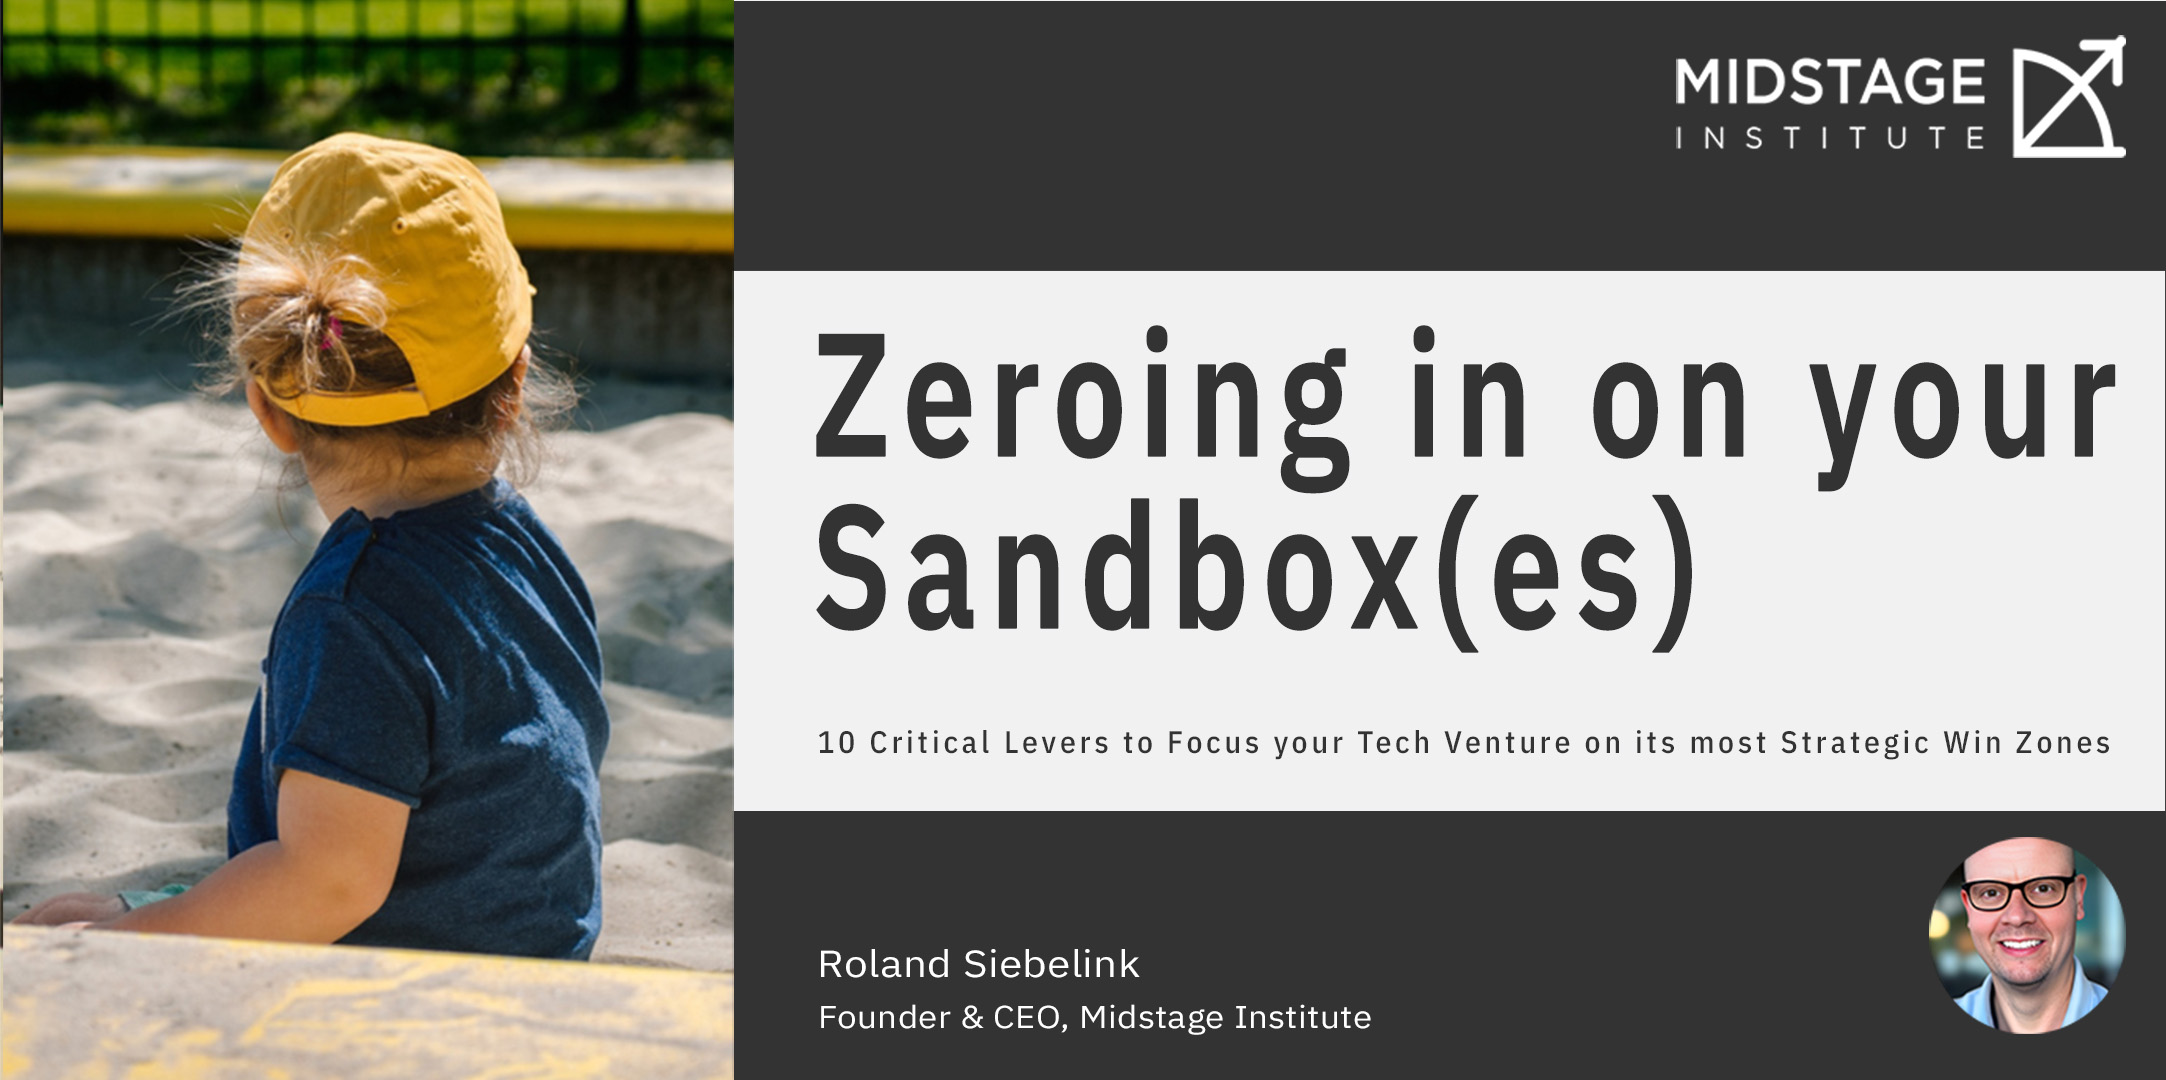 Zeroing In On Your Sandbox(es) 10 Critical Levers to Focus your Tech Venture on its most Strategic Win Zones